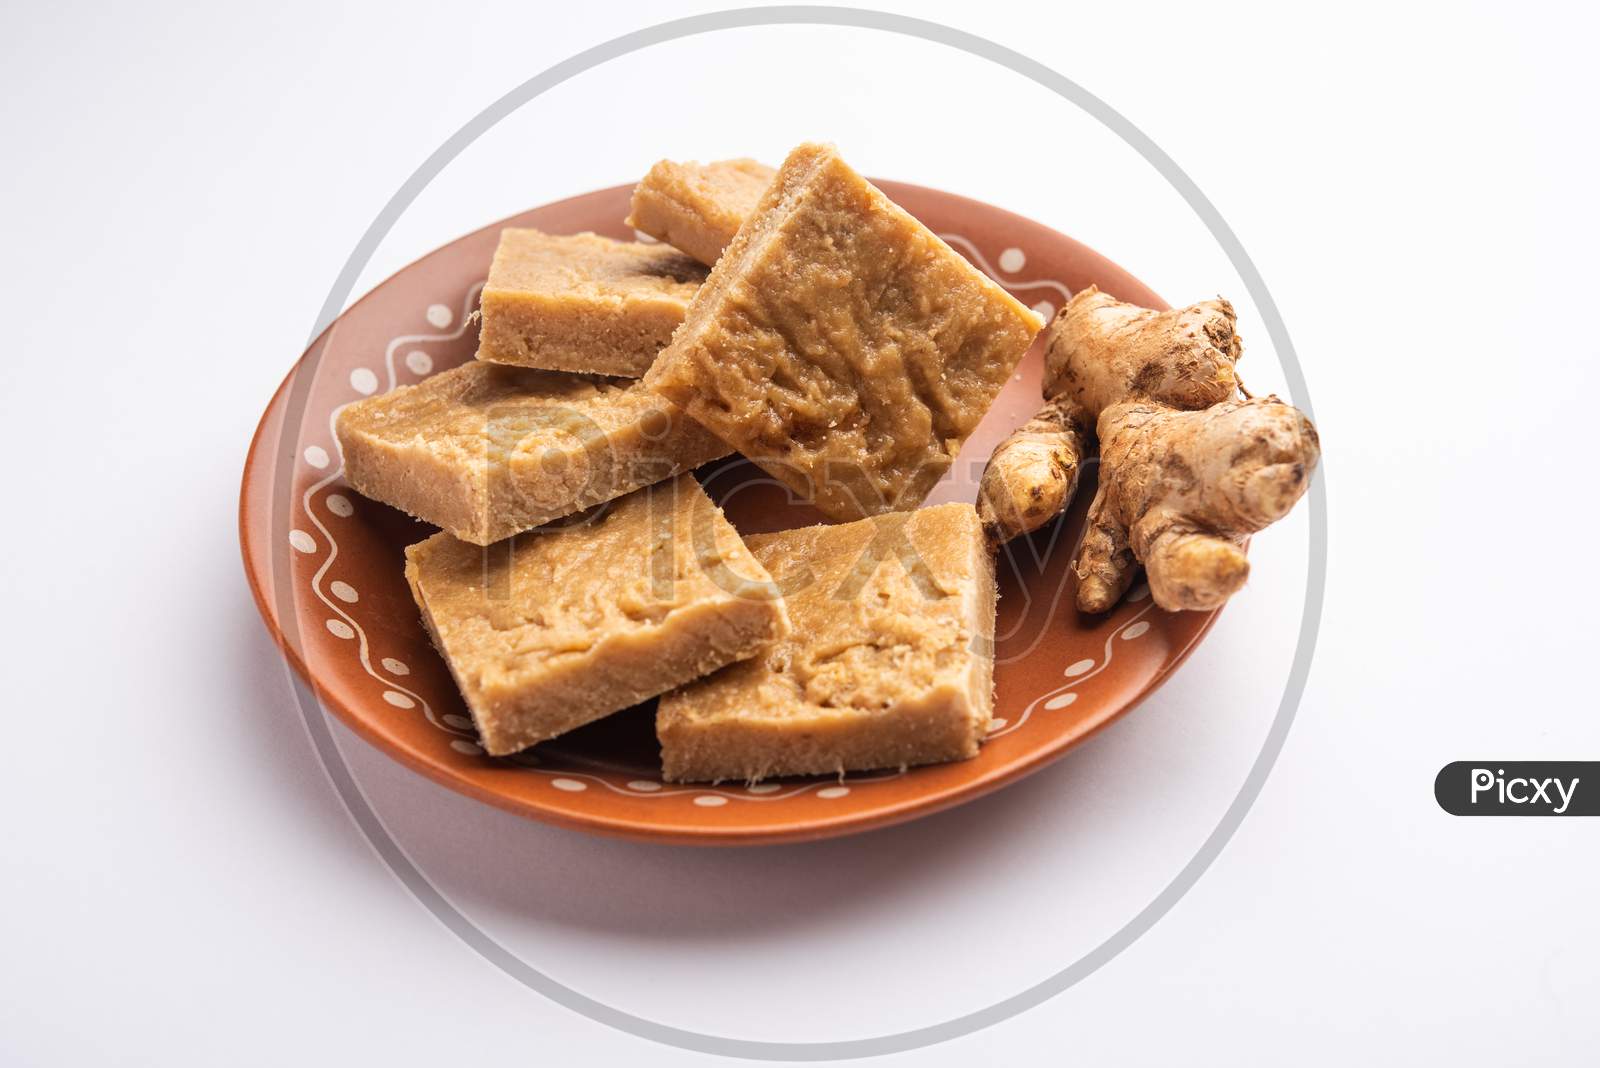 Aale Pak Or Ginger Barfi Or Candy Or Adrak Barfee Or Burfi Is A Traditional Indian Medicine For Cough And Cold